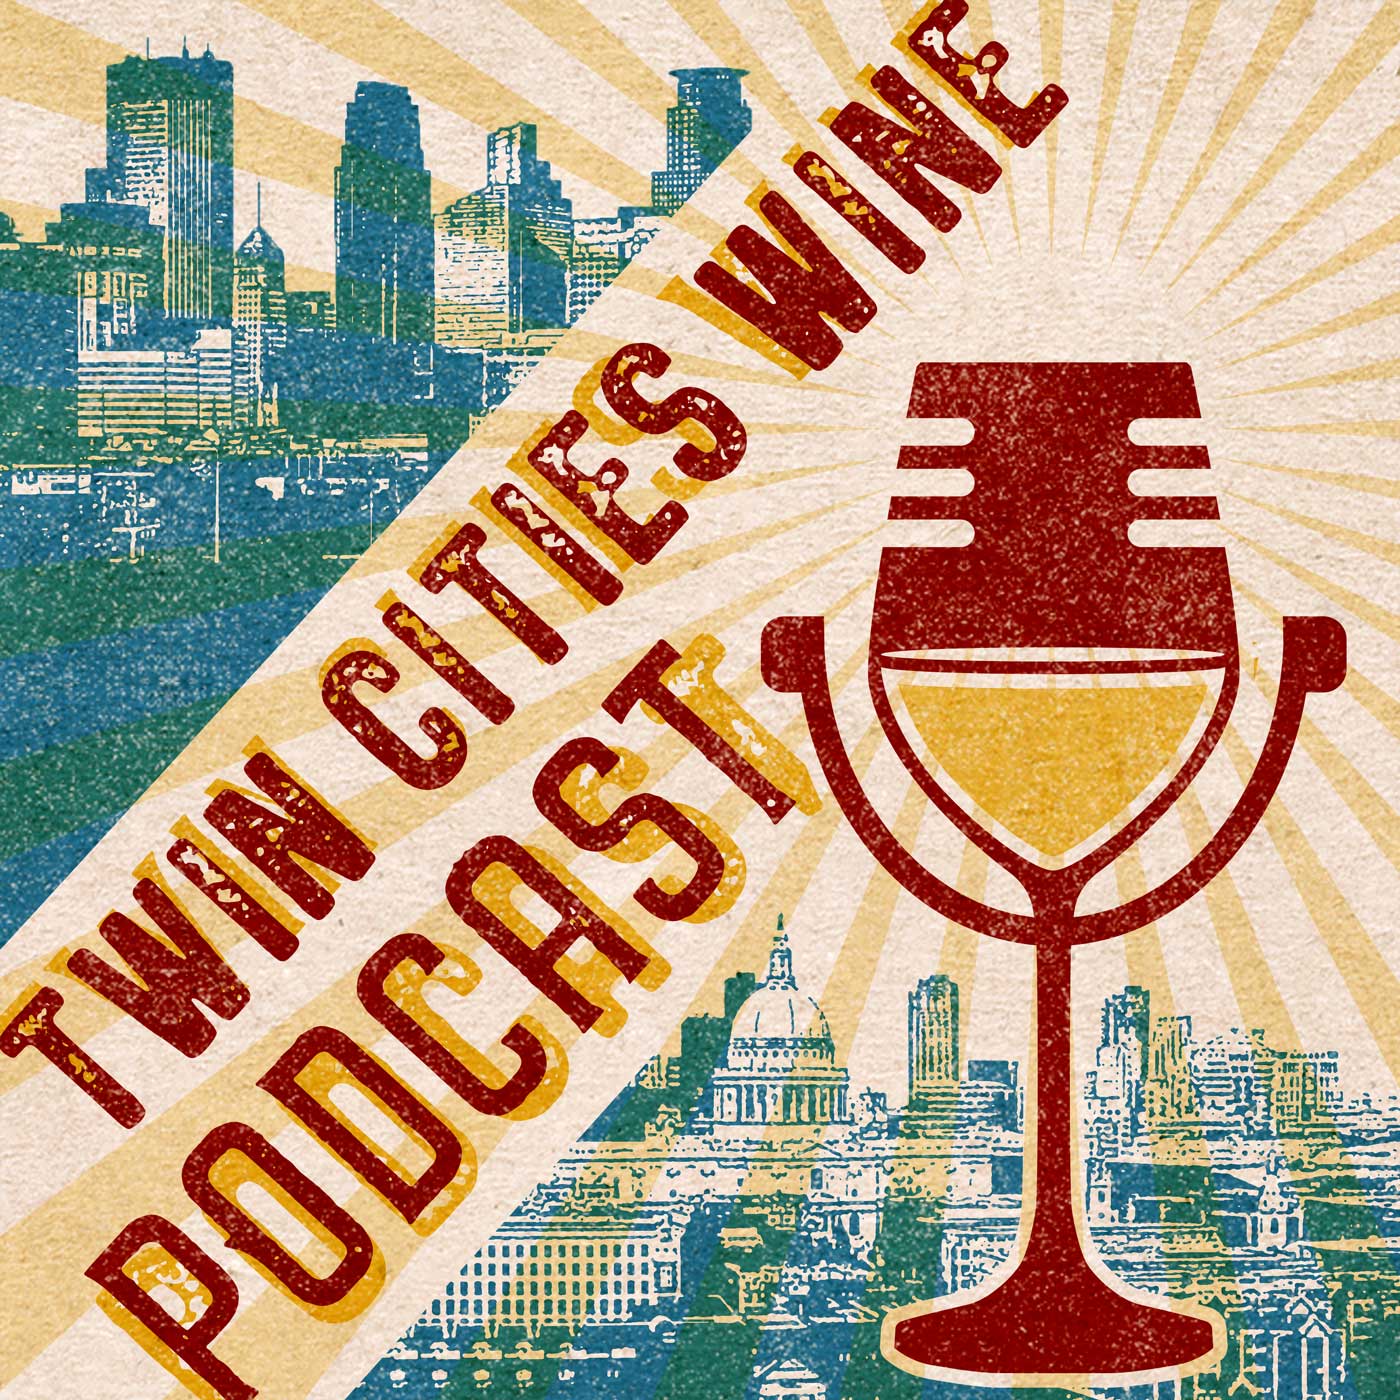 Where to buy your wine in the Twin Cities